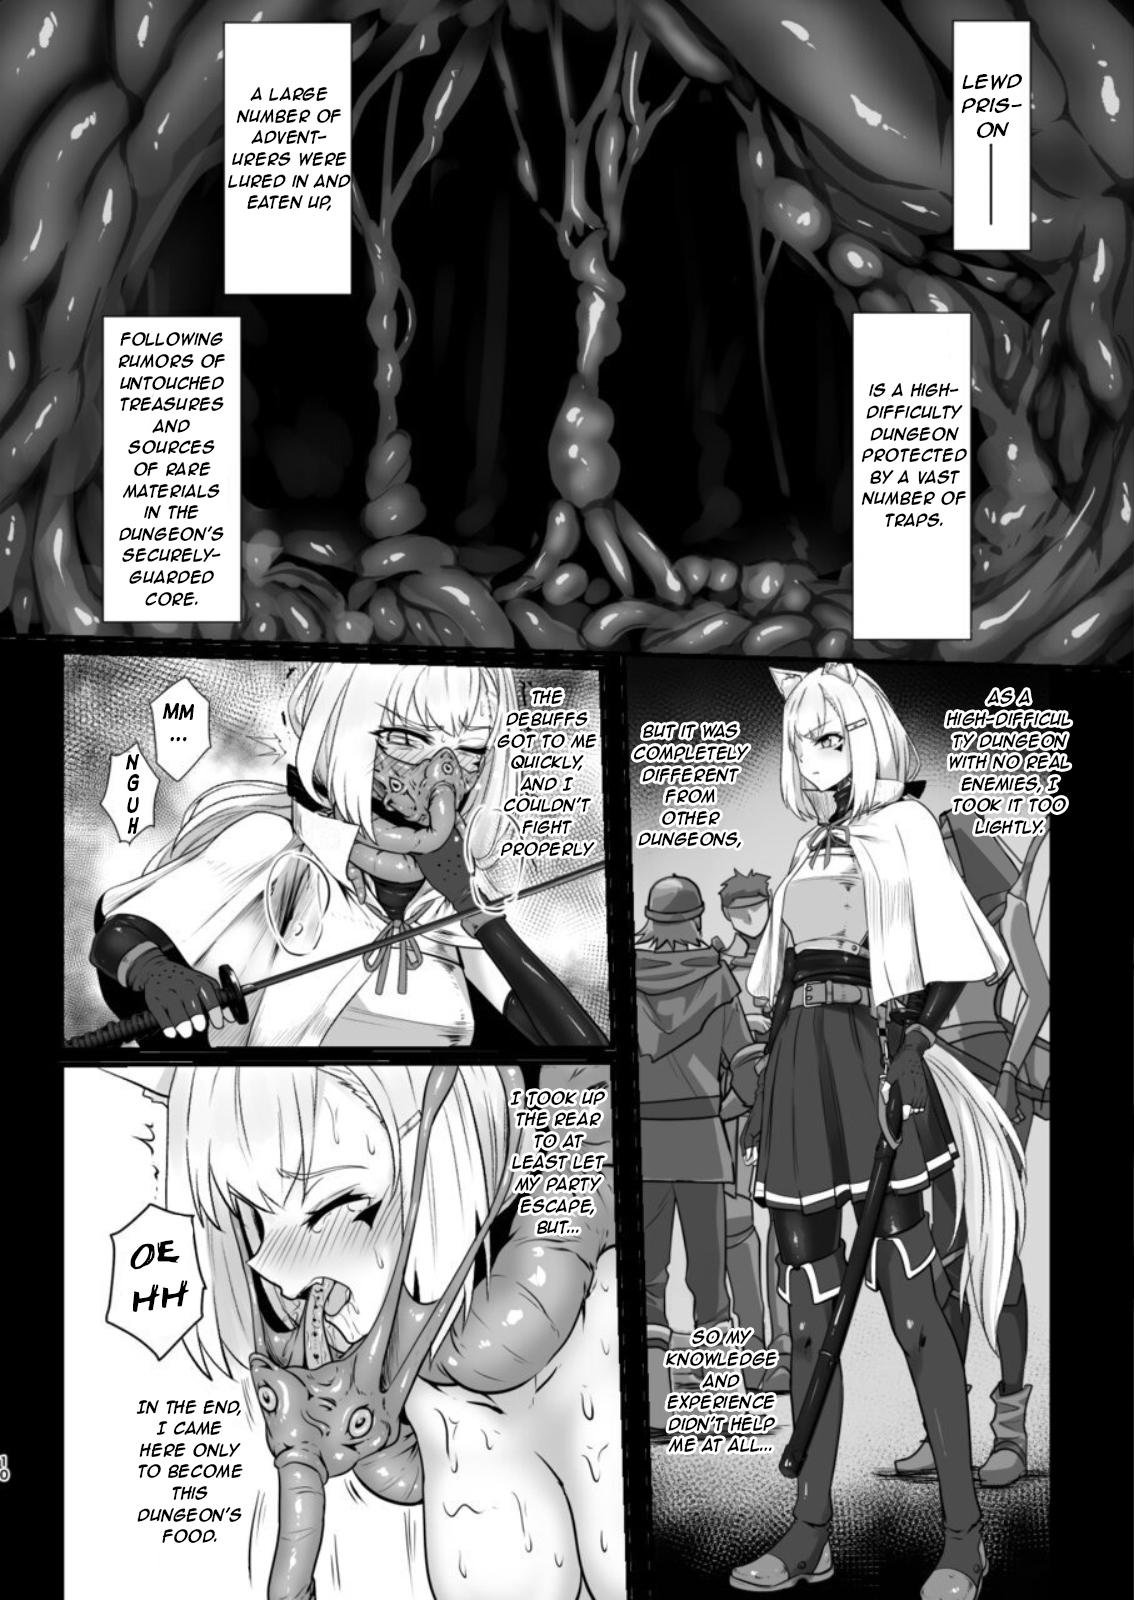 Gets Werewolf - Reincarnated in Living clothes... 2 - Original Amature Porn - Page 10